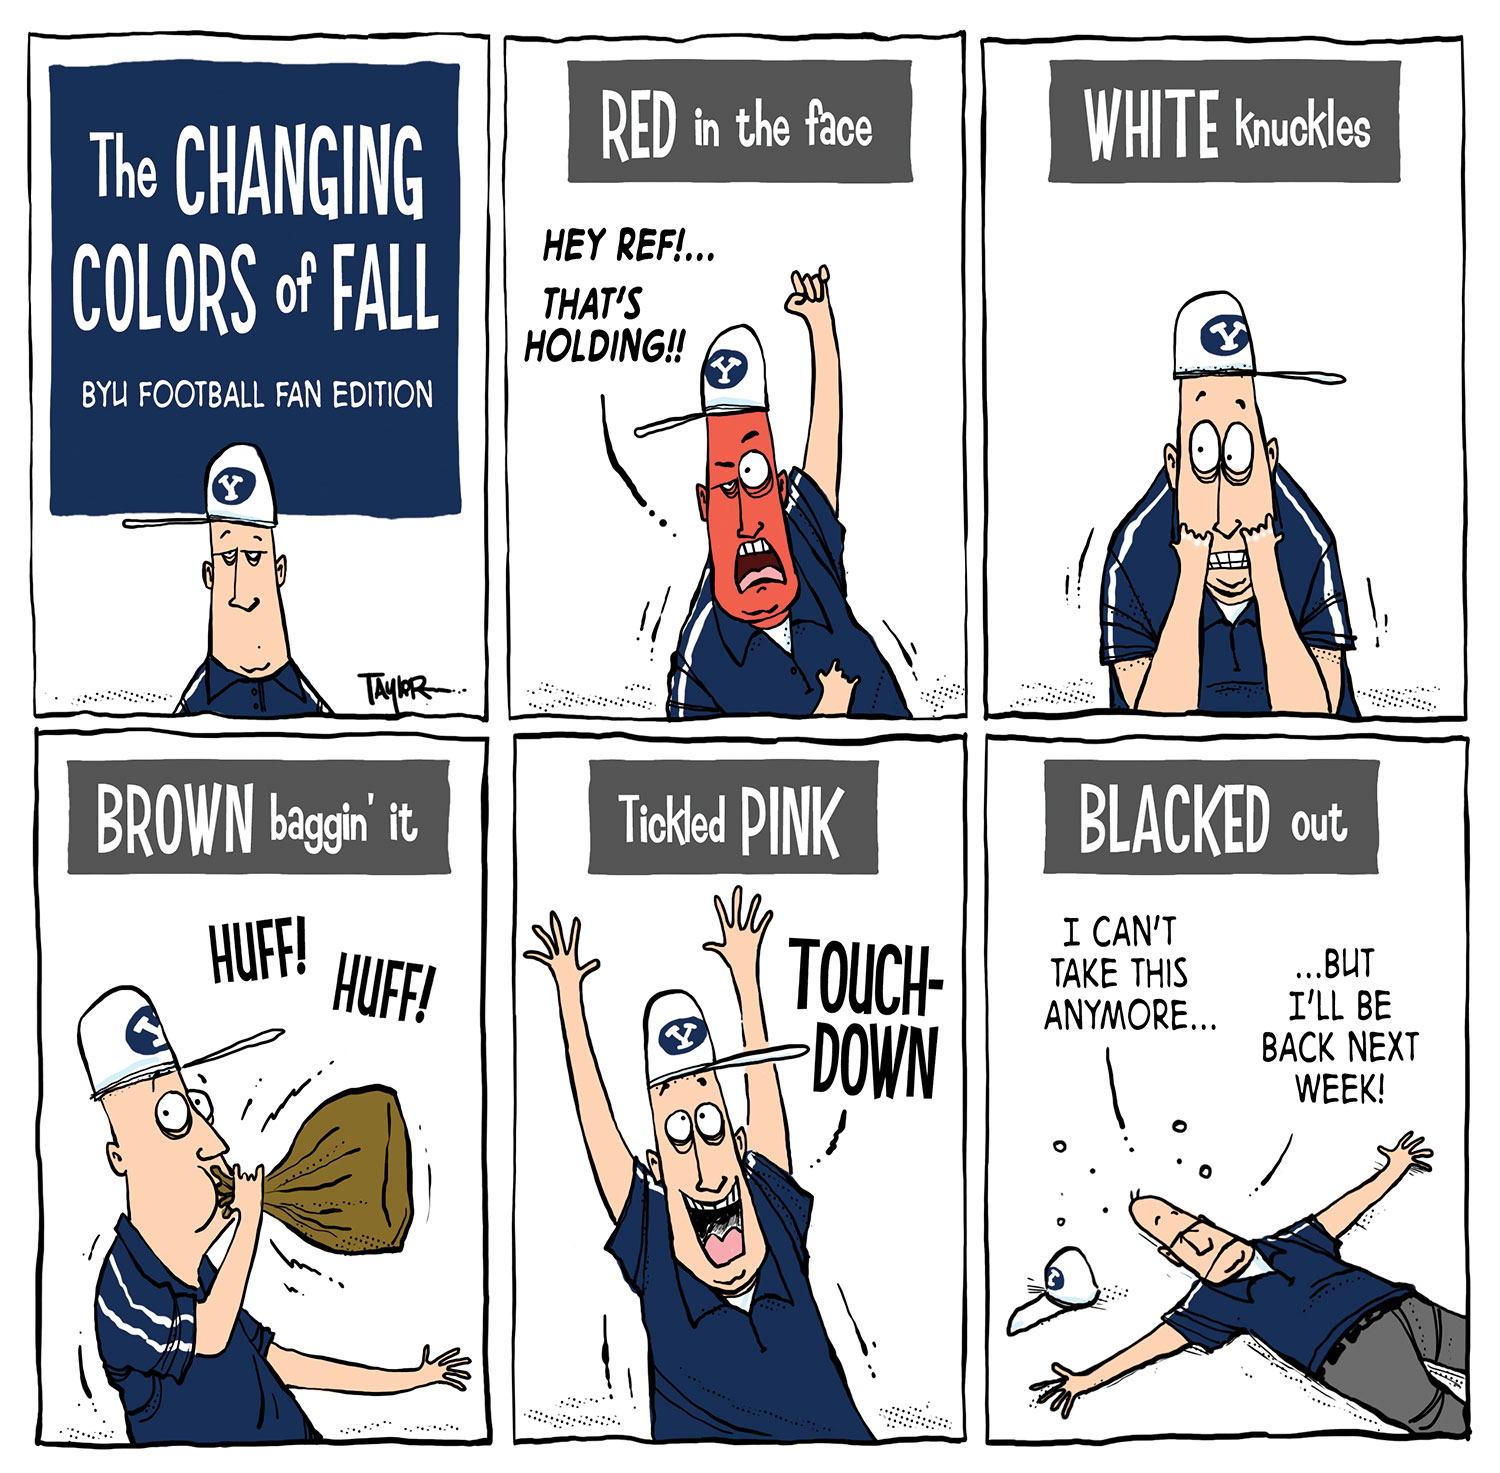 A comic on fall colors and BYU fans.